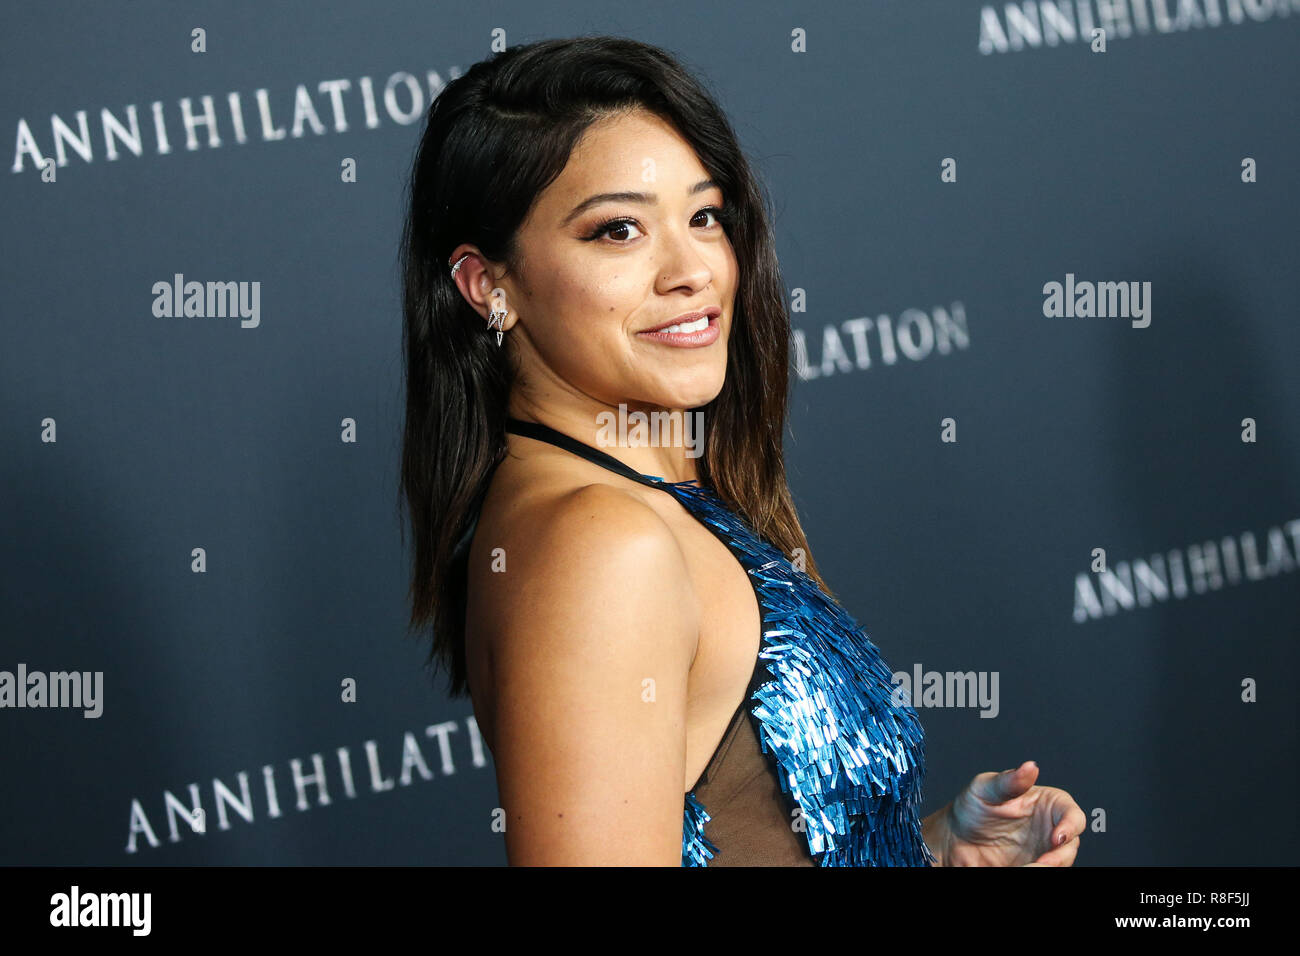 WESTWOOD, LOS ANGELES, CA, USA - FEBRUARY 13: Gina Rodriguez at the Los Angeles Premiere Of Paramount Pictures' 'Annihilation' held at the Regency Village Theatre on February 13, 2018 in Westwood, Los Angeles, California, United States. (Photo by Xavier Collin/Image Press Agency) Stock Photo